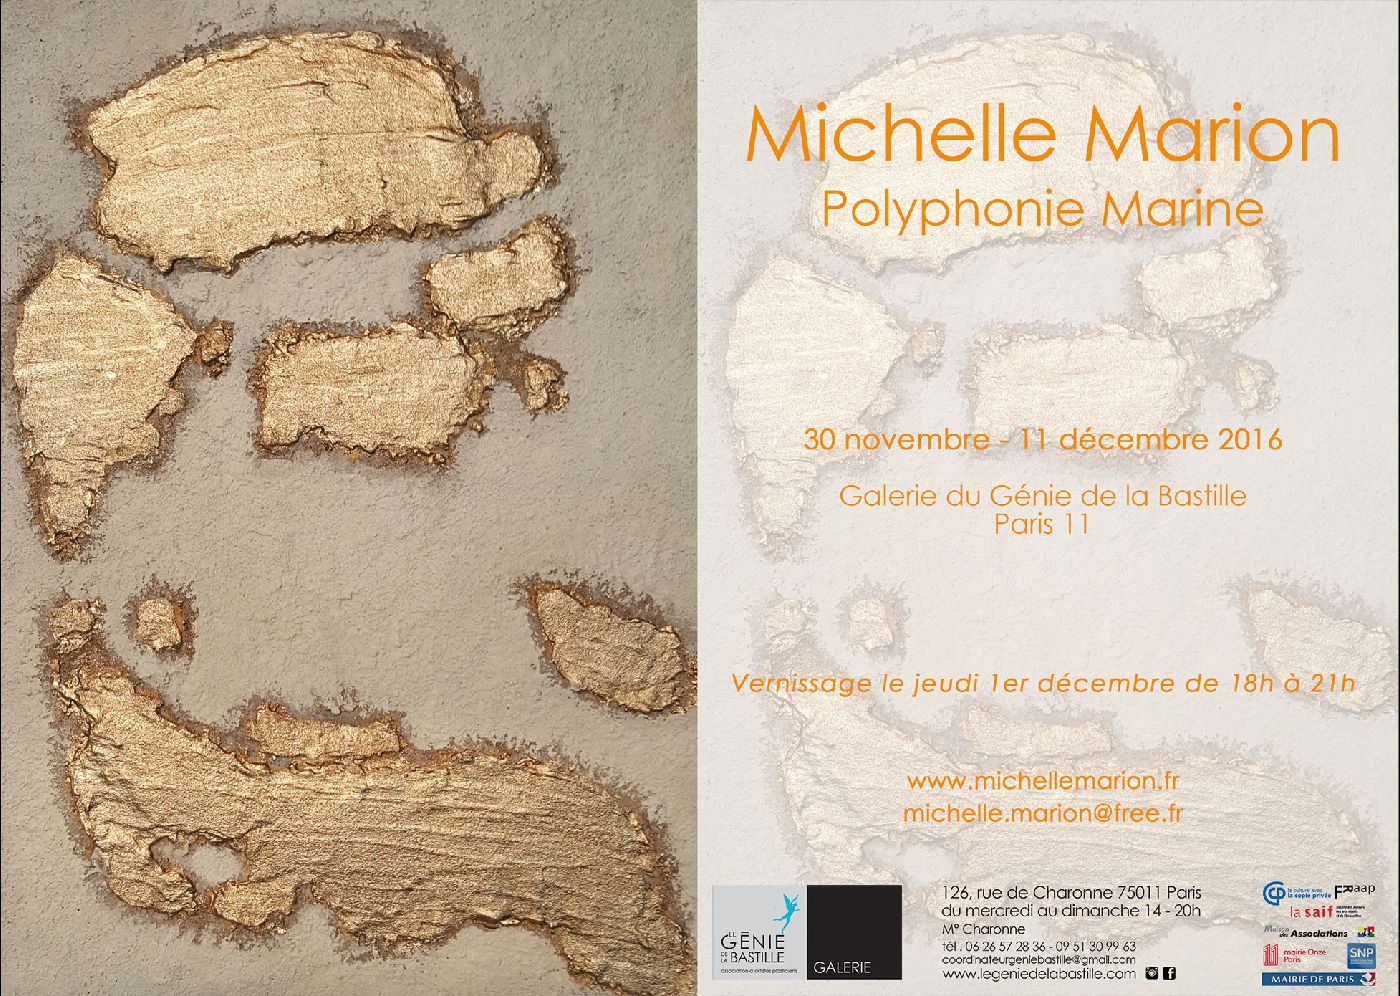 Exposition "Polyphonie Marine" - Michelle Marion